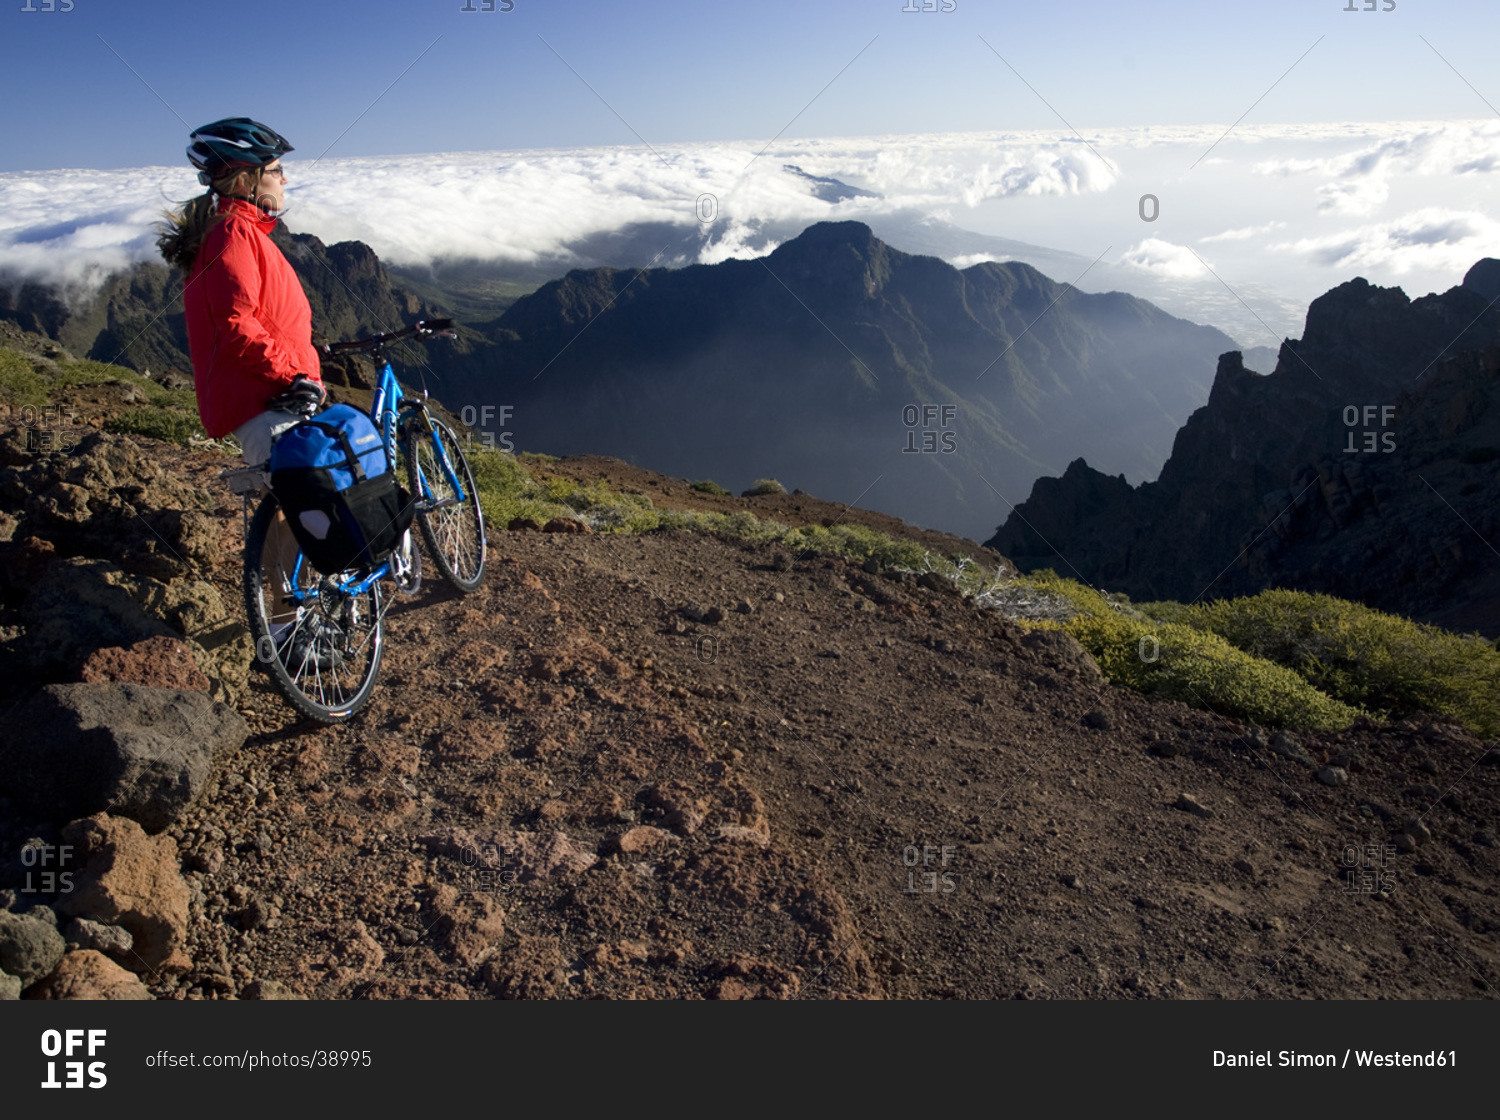 Spain, The Canary Islands, La Palma, Woman with mountain bike looking at mountain scenery